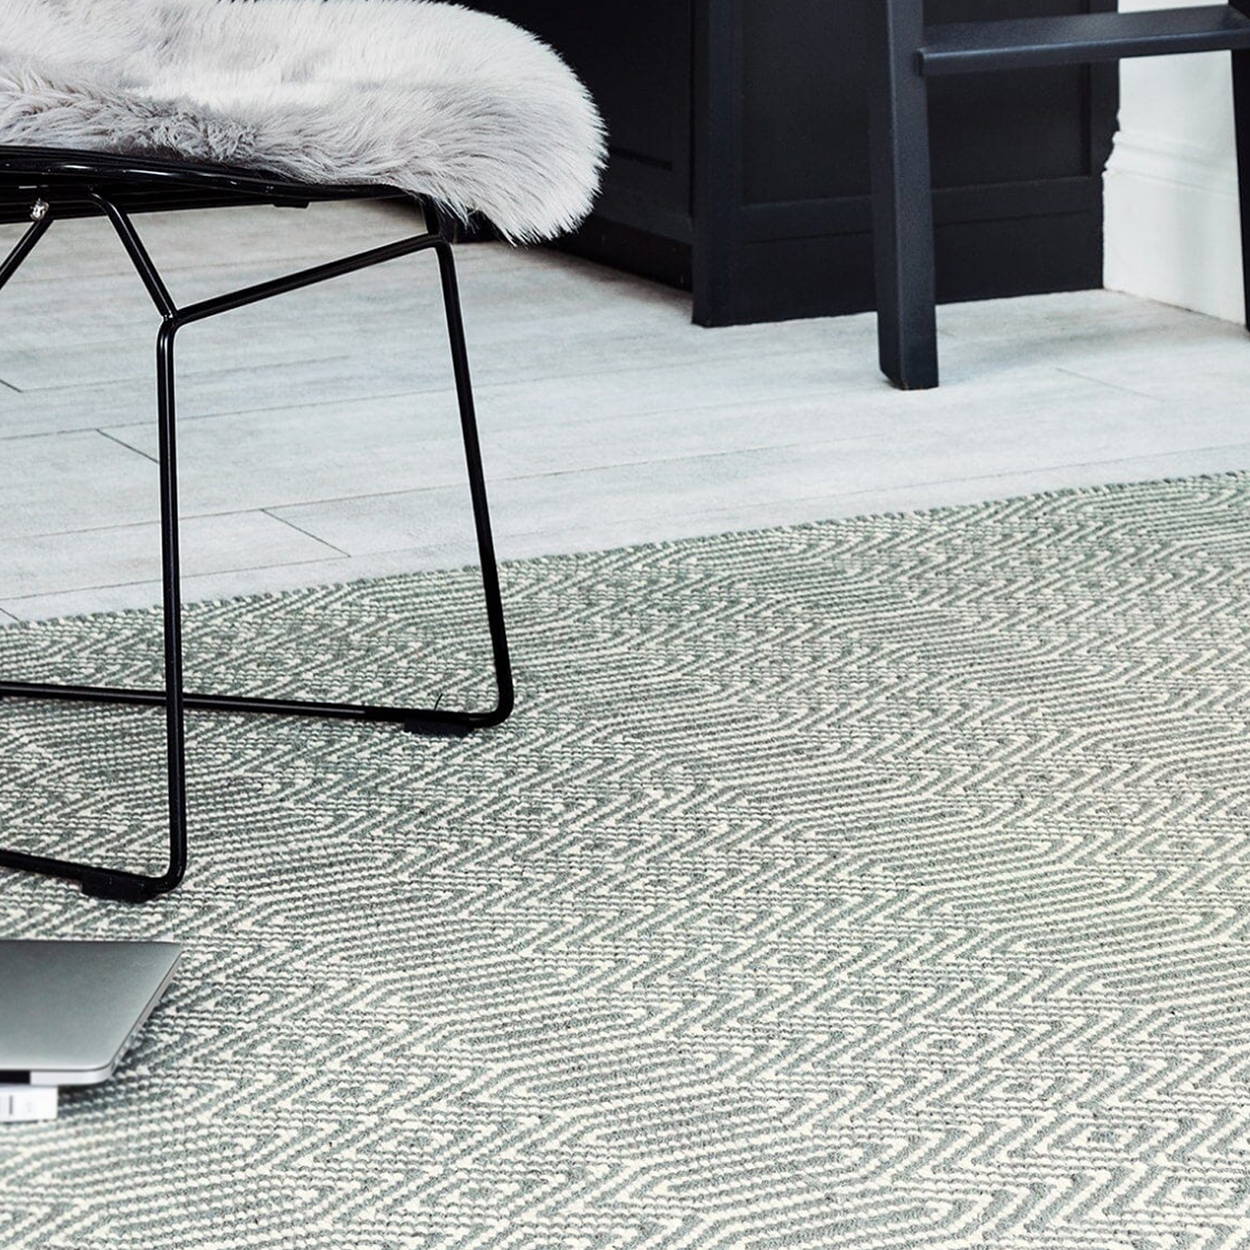 Sloan Rugs Now Available Online - Norwich